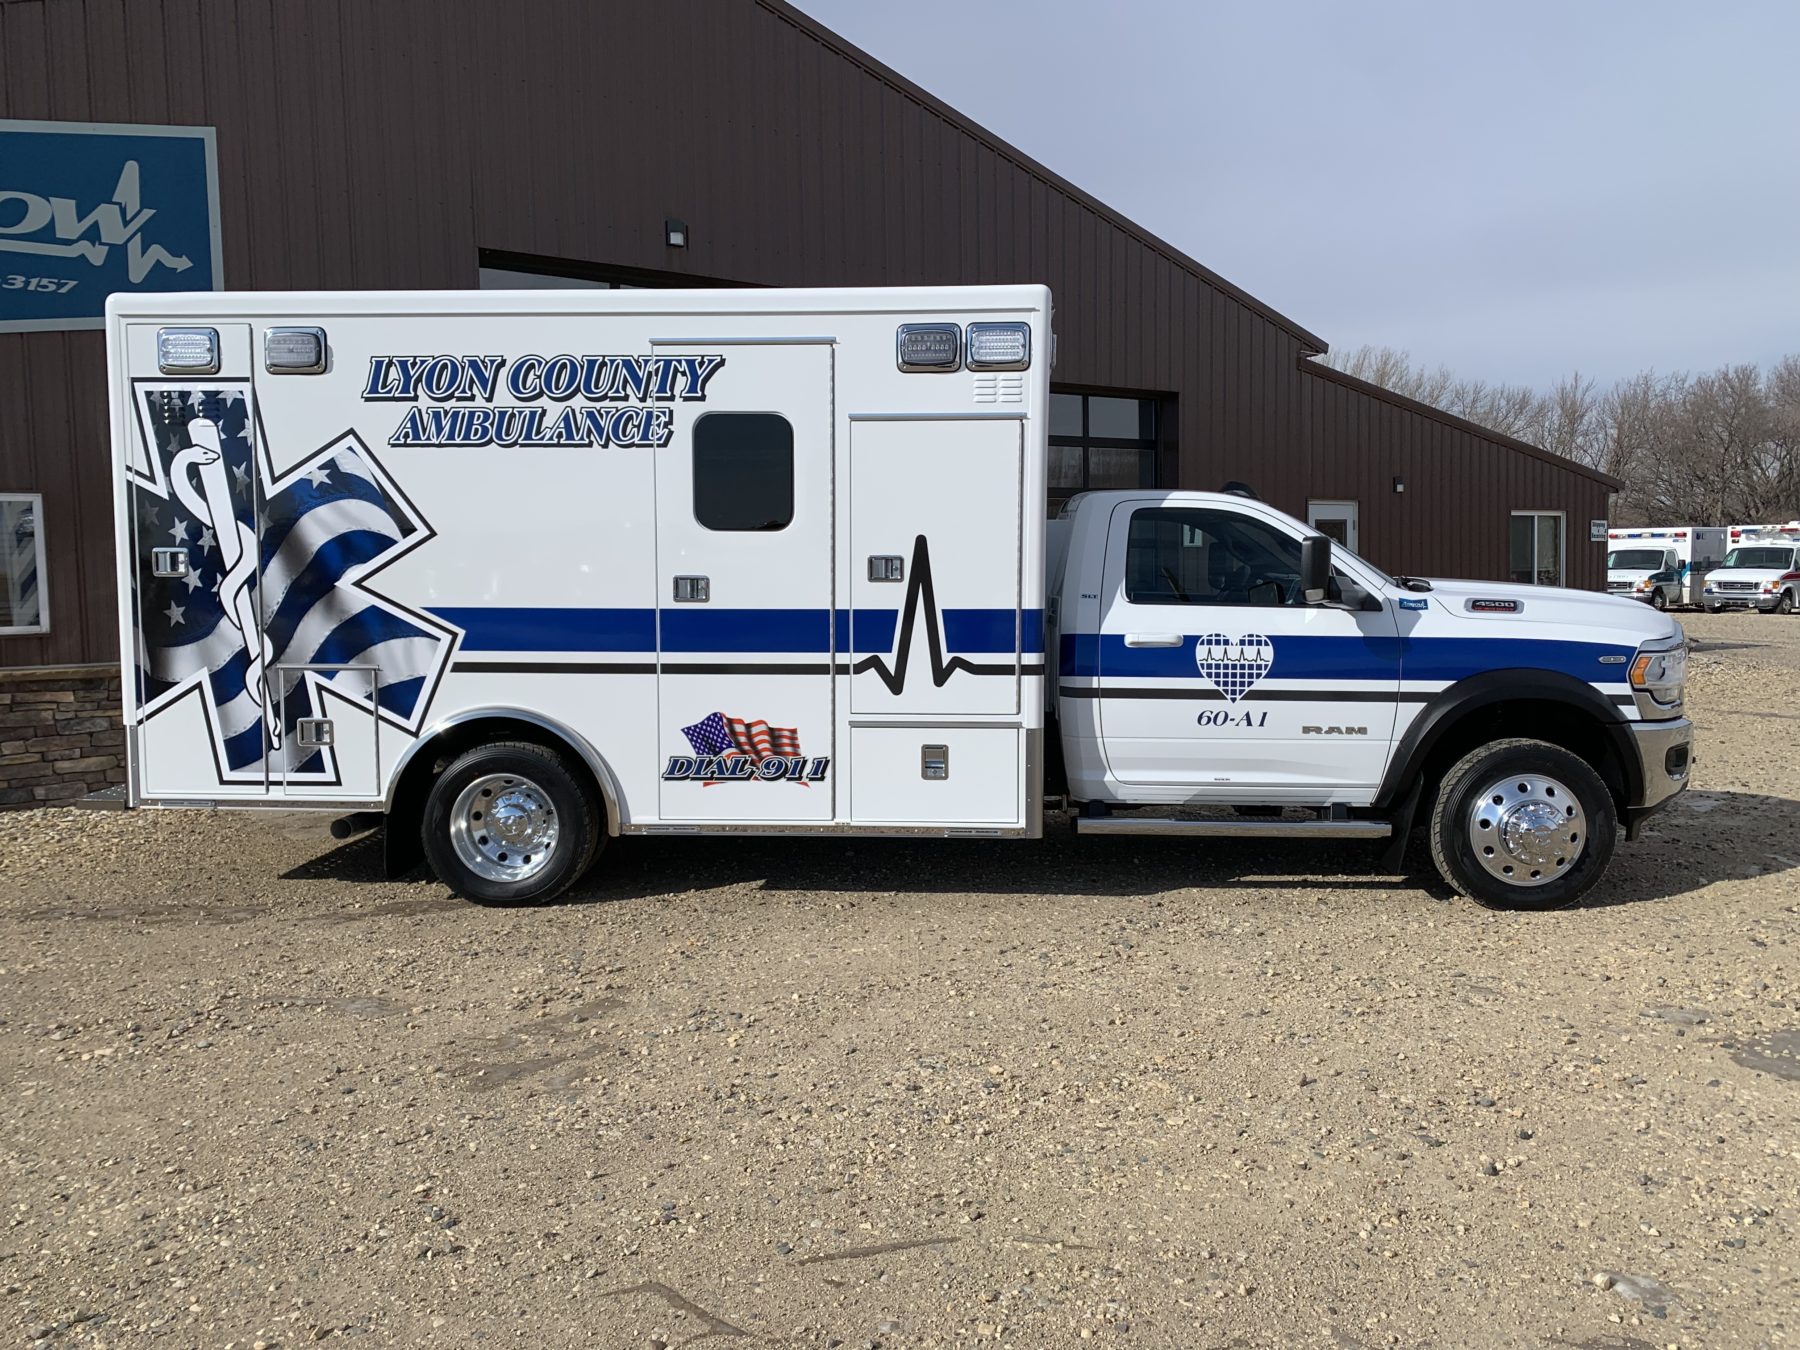 2021 Ram 4500 4x4 Heavy Duty Ambulance For Sale – Picture 3